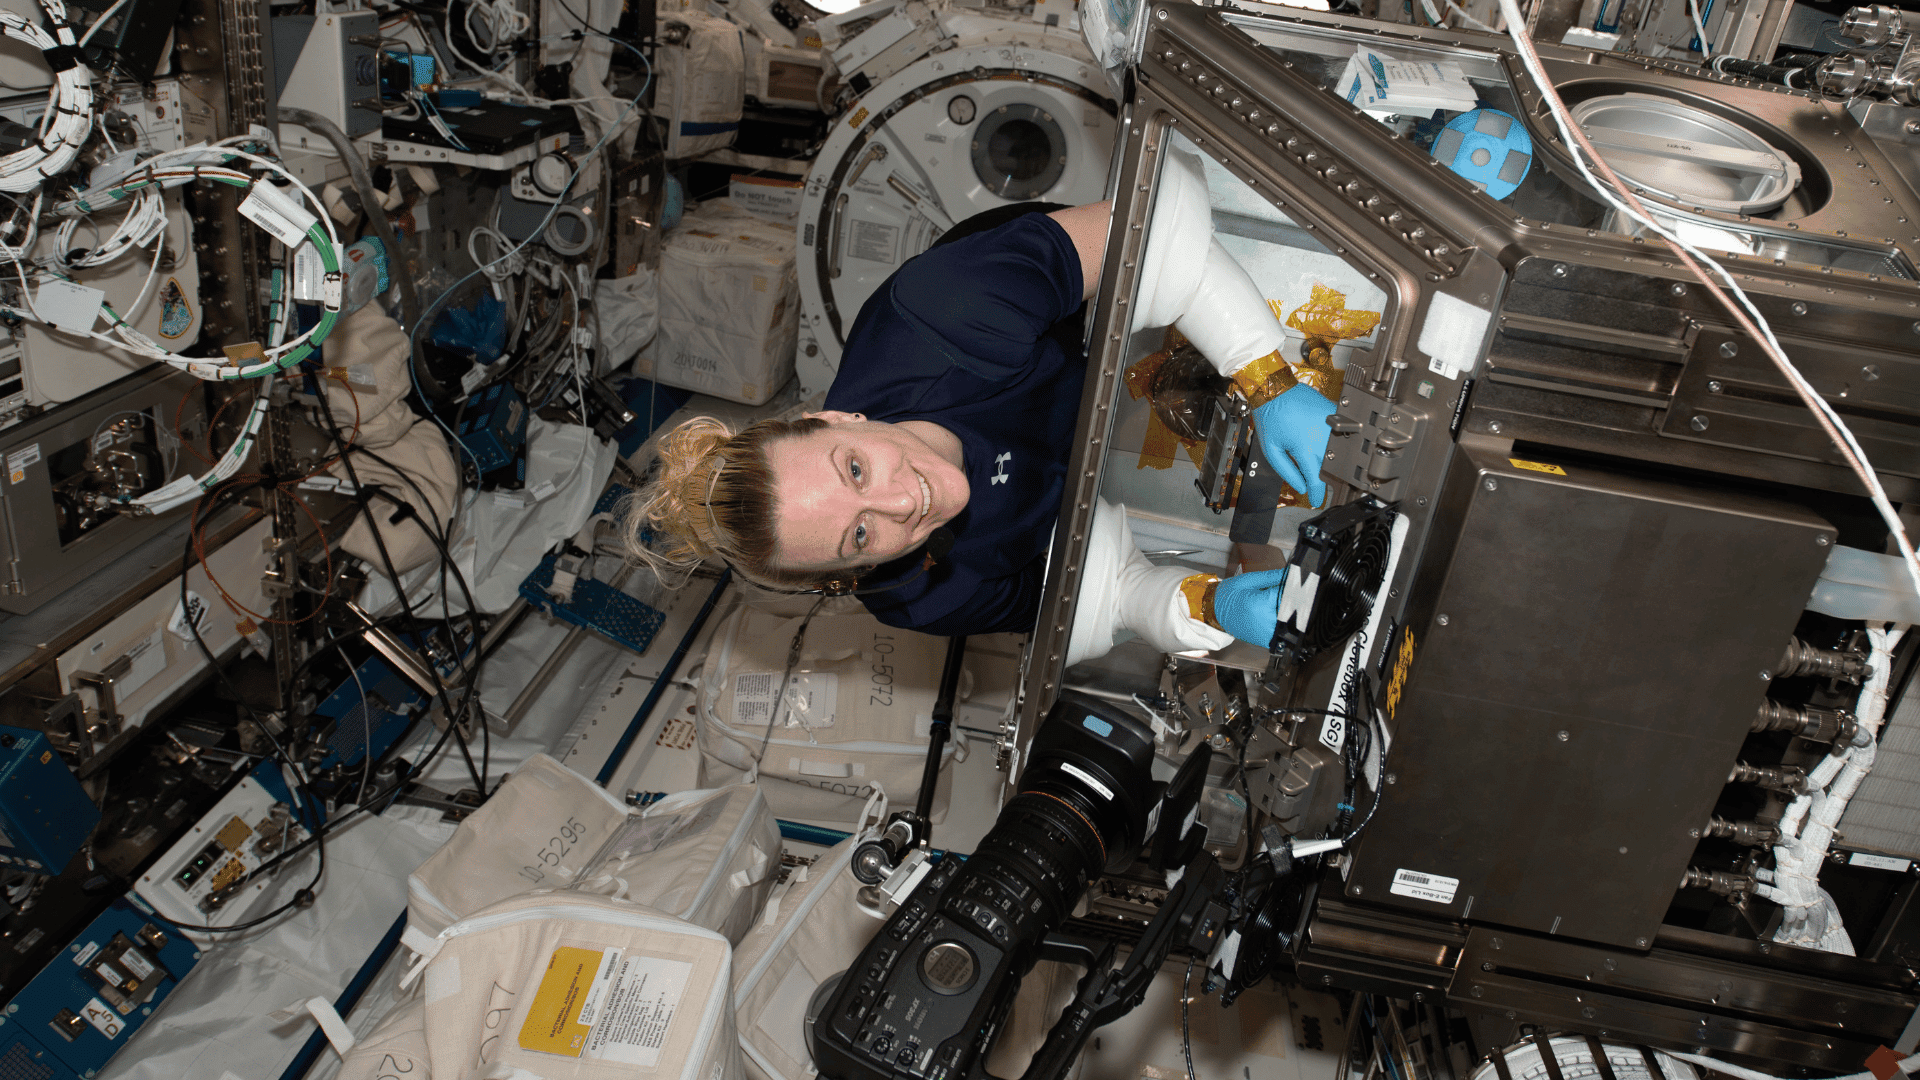 NASA astronaut Kate Rubins services samples for an earlier run of the biofilm study, which now looks at how spaceflight affects the formation of microbial biofilms